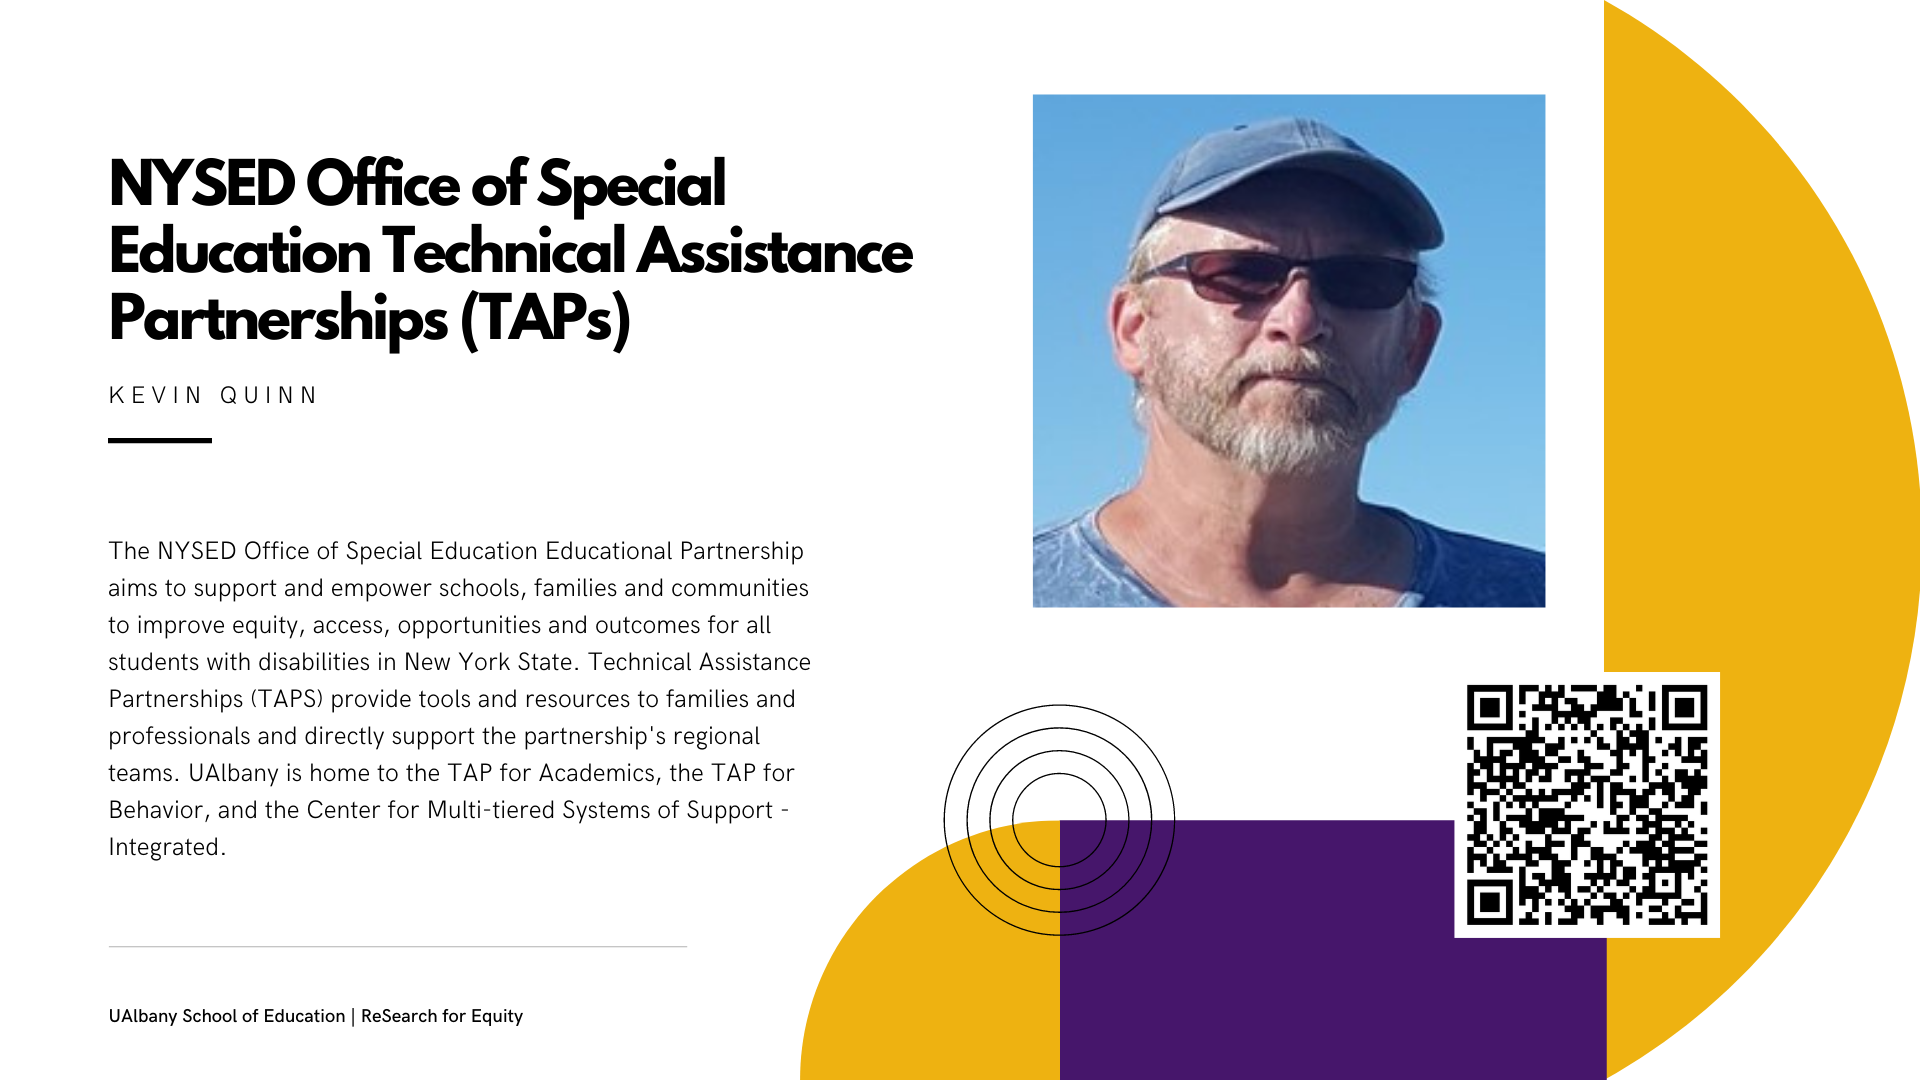 white slide with title and same text as caption, purple and yellow shapes to the right, photo of Kevin Quinn with blue hat and shirt and sun glasses with blue sky backdrop, QR code